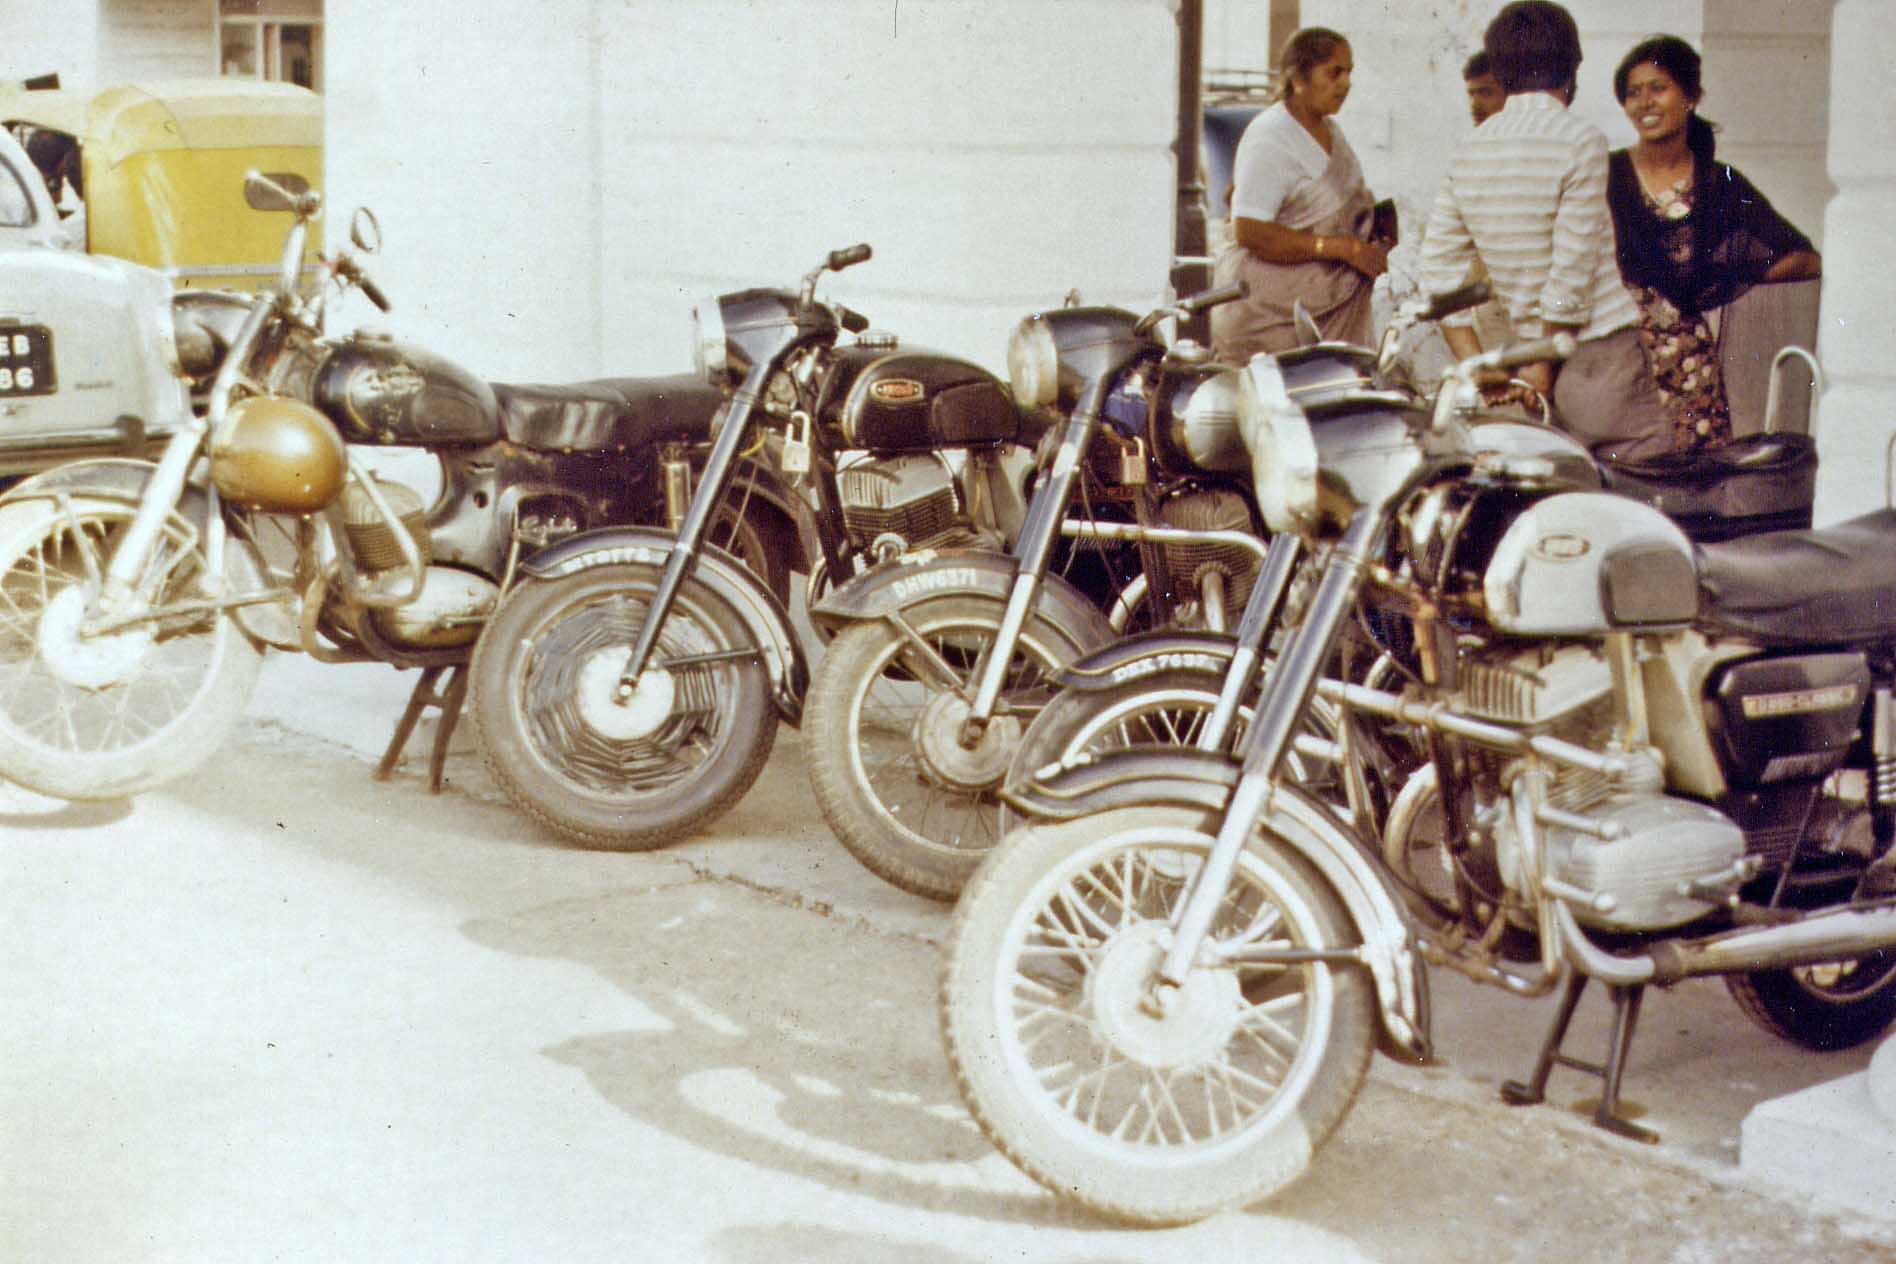 Motor bikes at Connaught Place in New Delhi